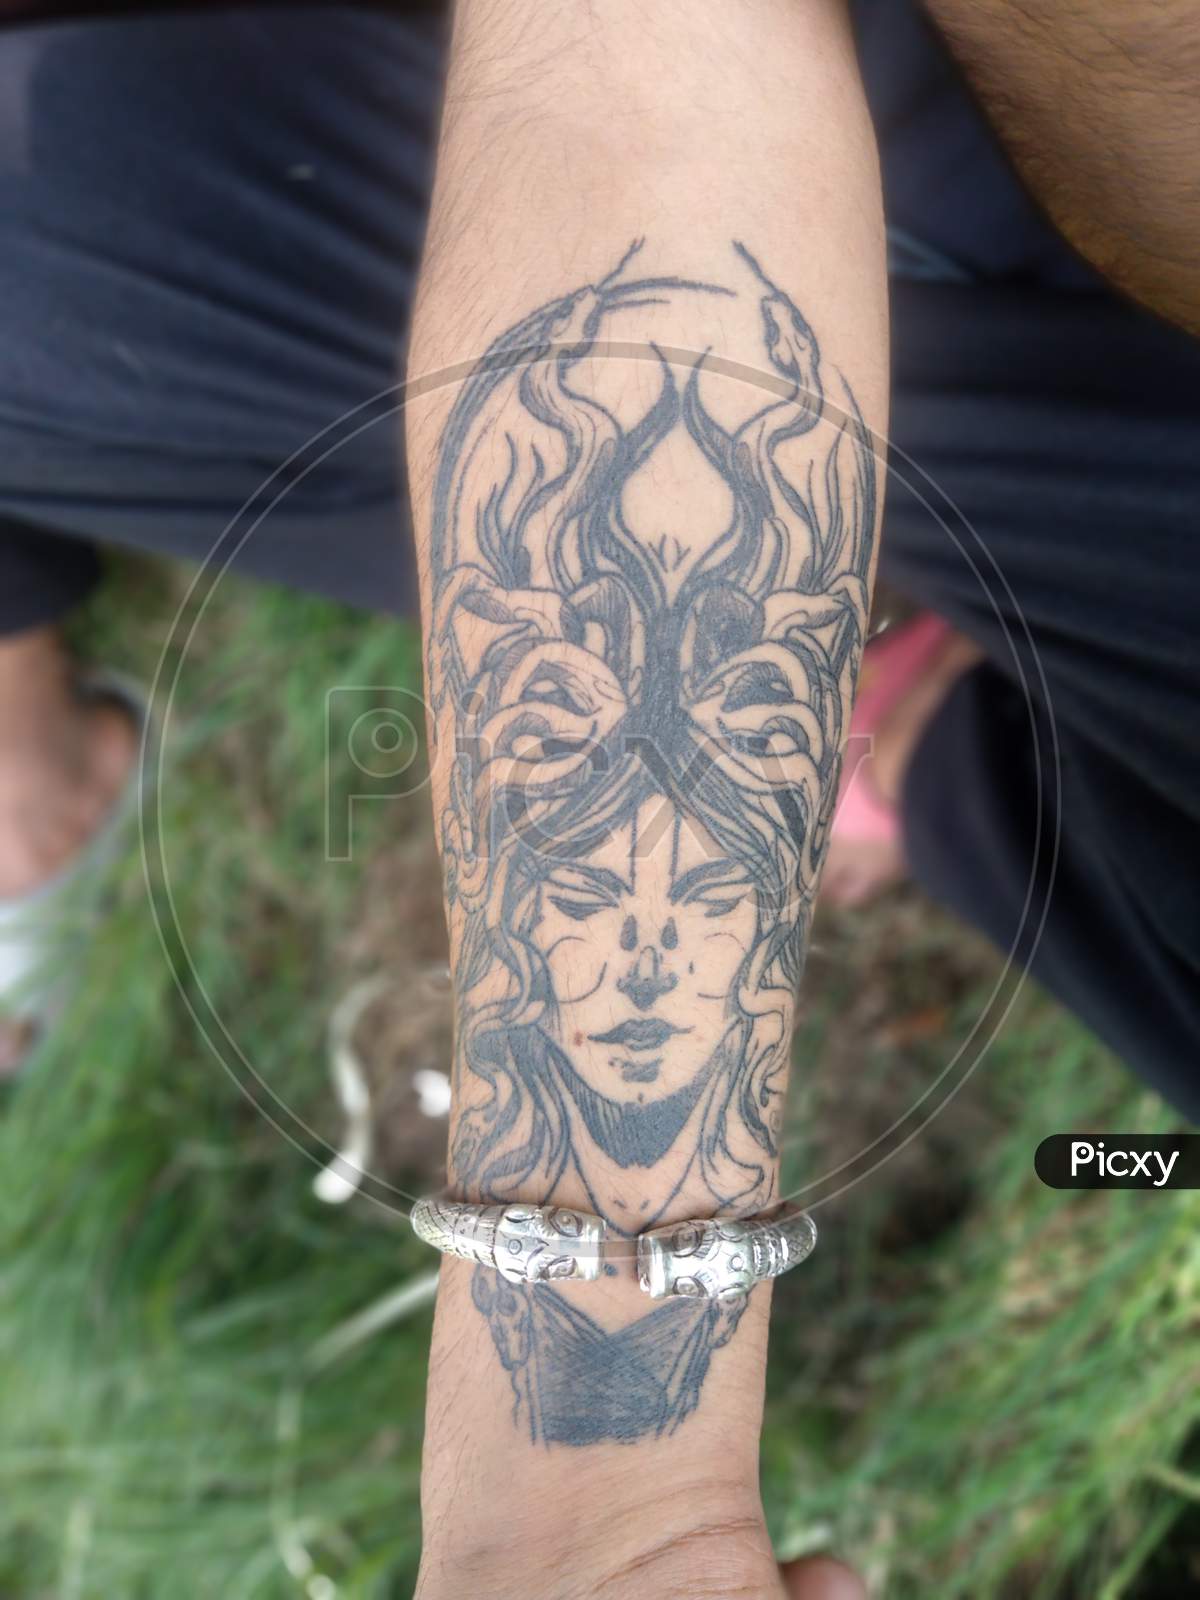 Bad Magical Tattoos  Tandav Dance of Shiva This is when Lord Shiva